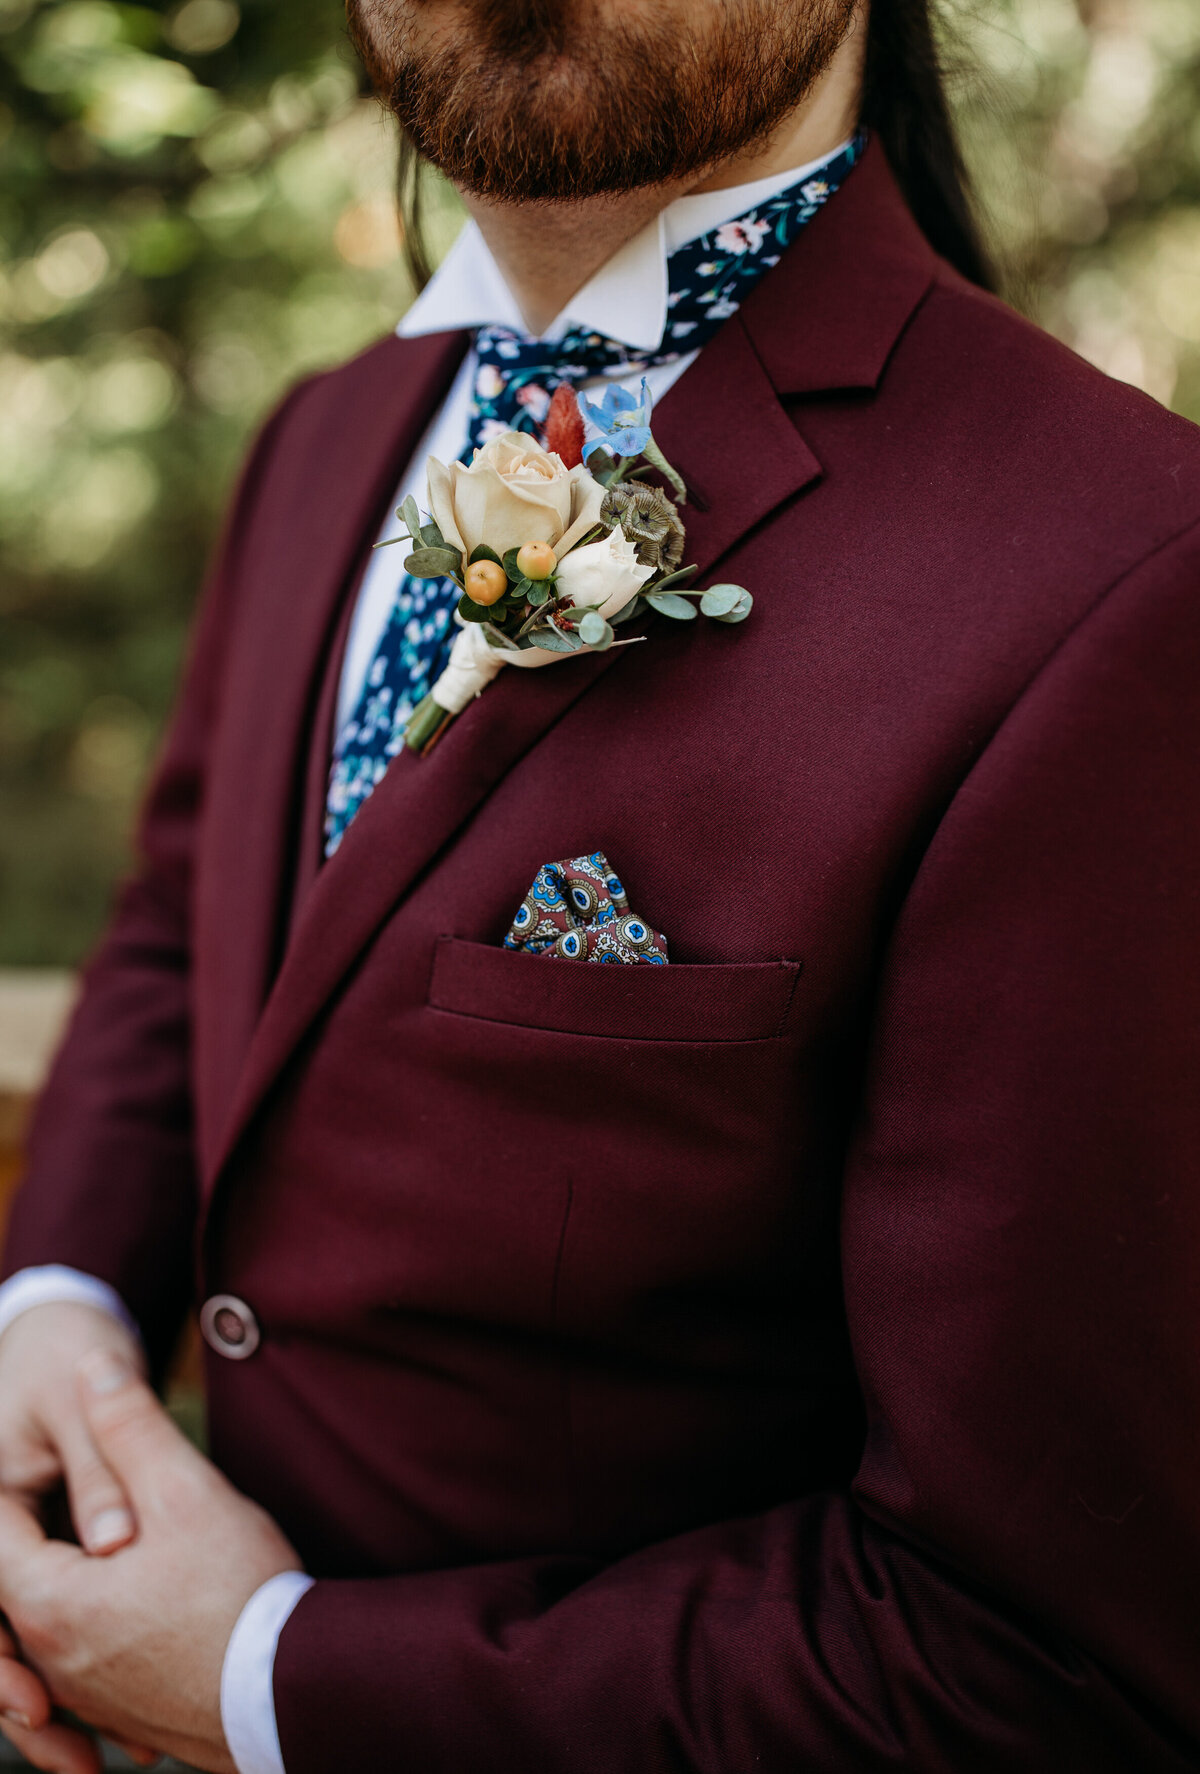 Close-up of a maroon suit jacket with a vibrant floral tie and a boutonniere featuring a rose and greenery